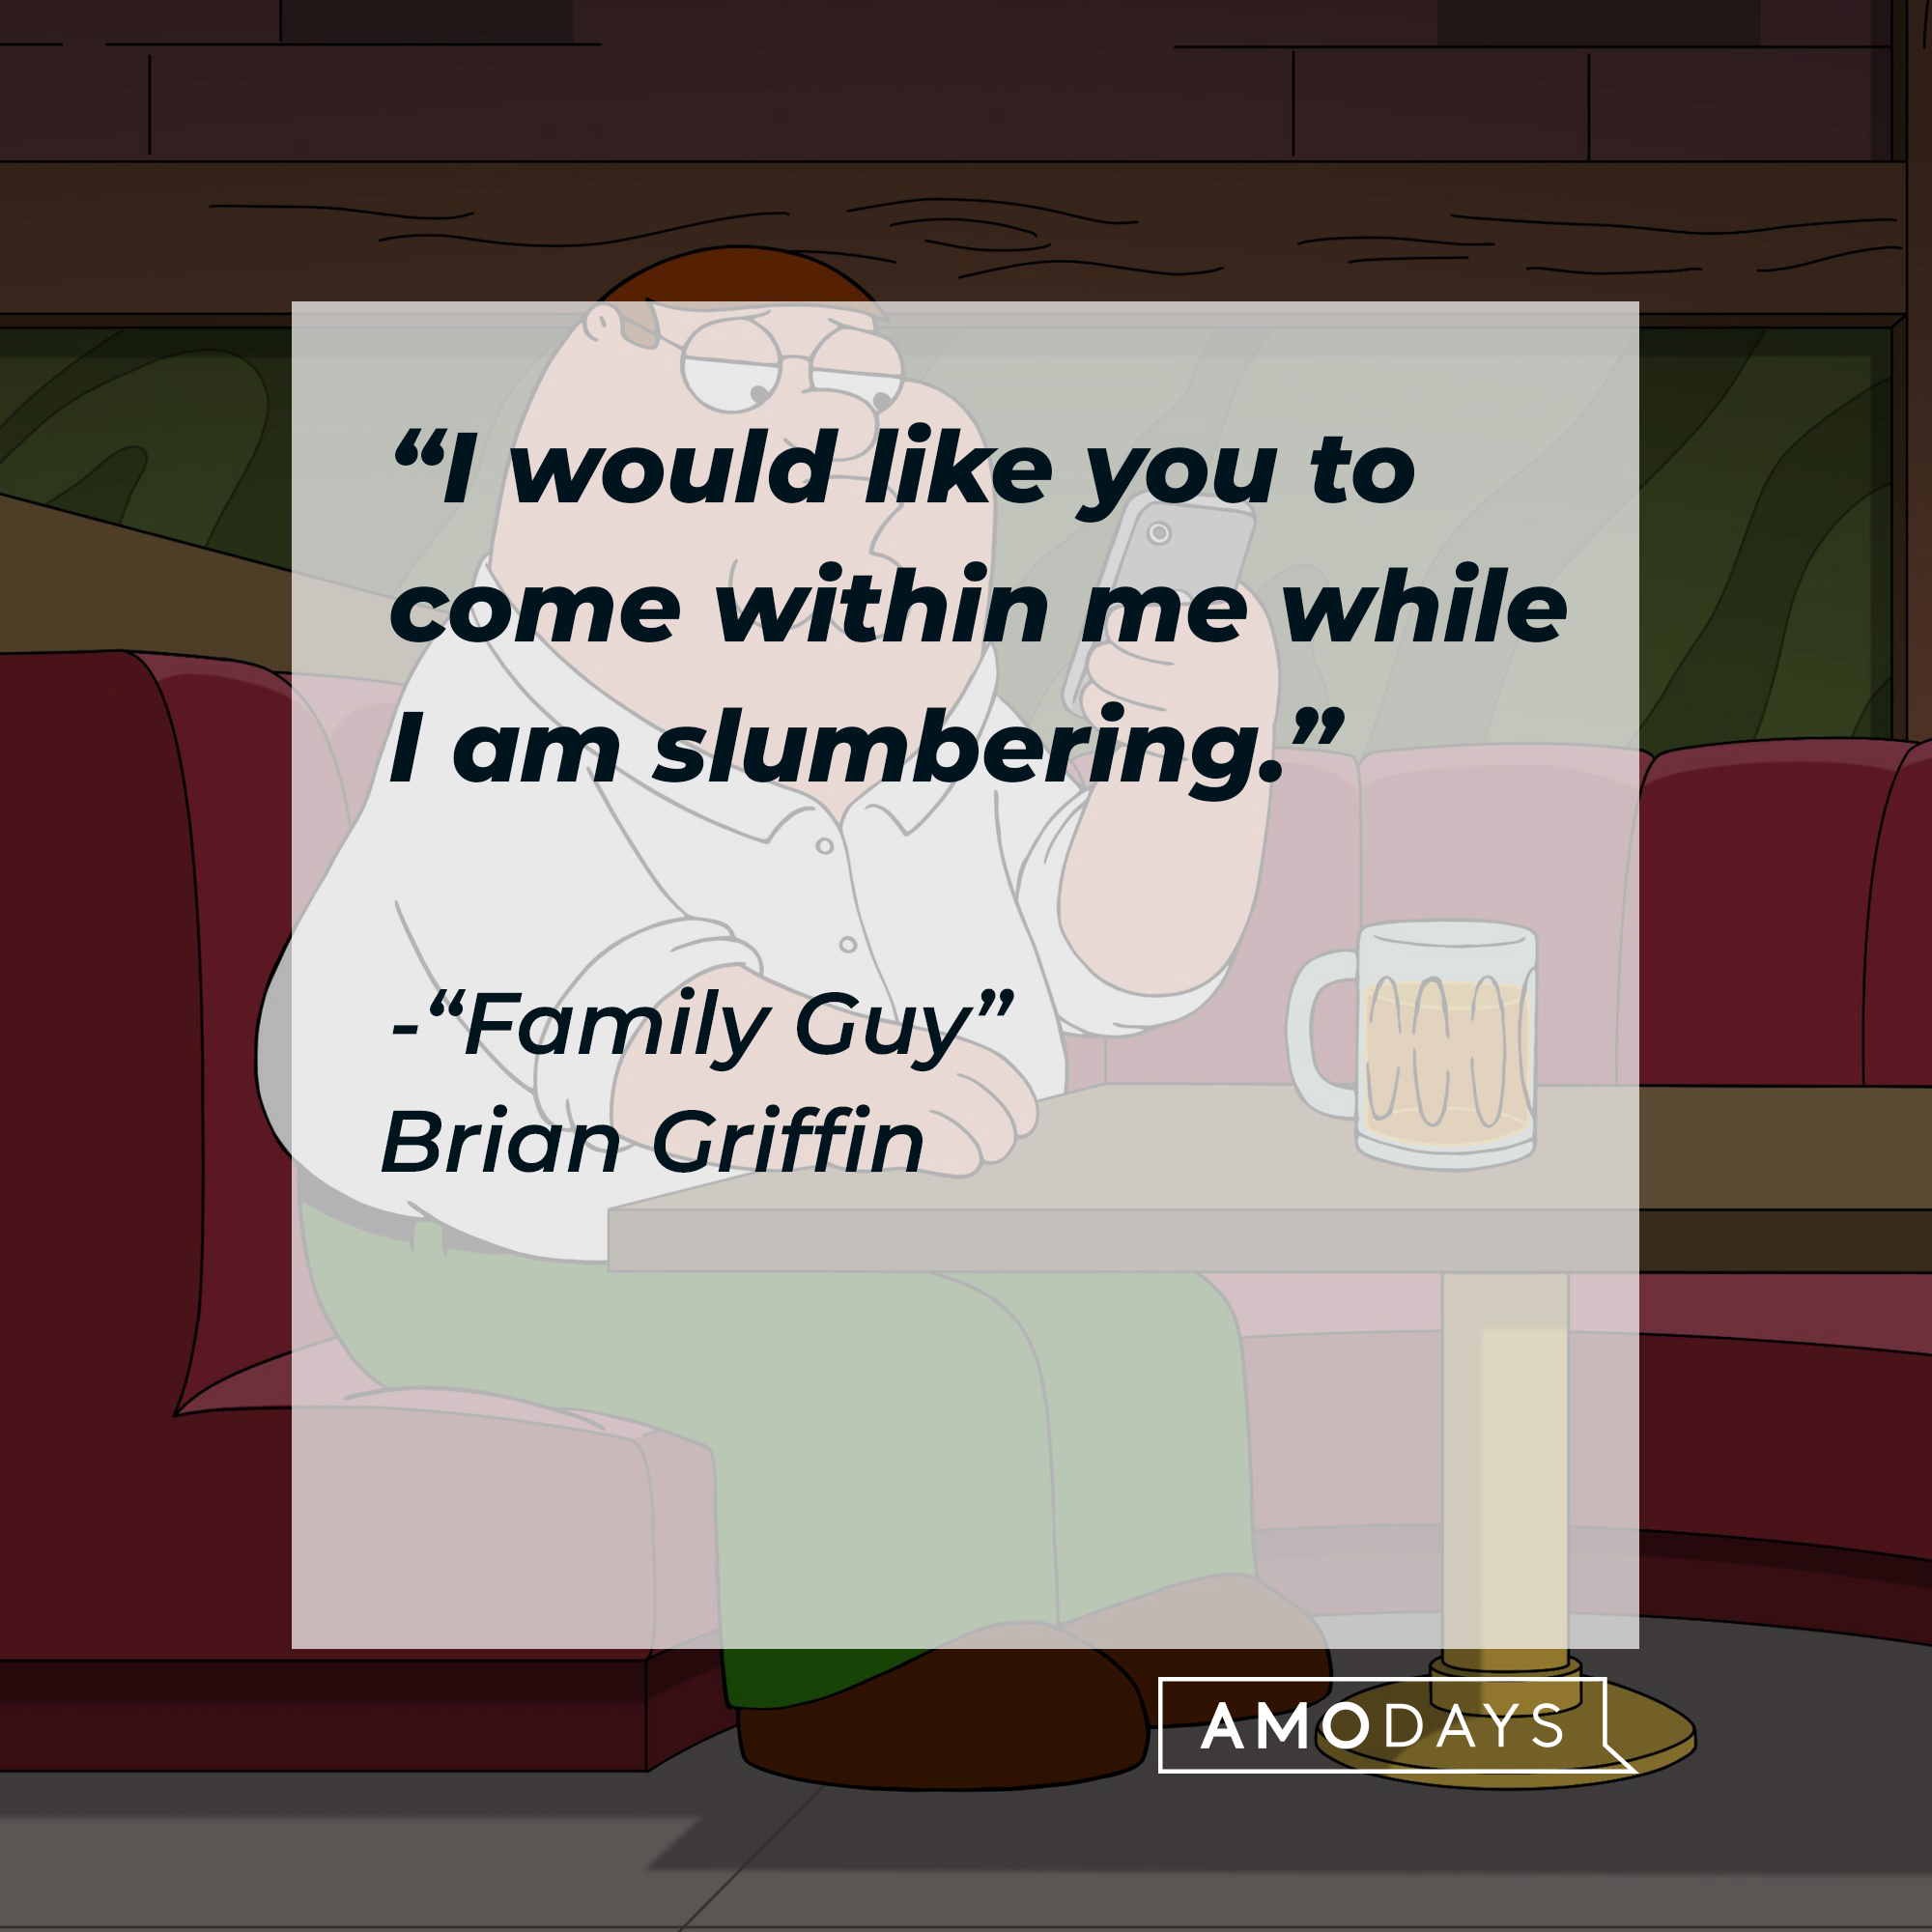 Peter Griffin with Brian Griffin's quote: “I would like you to come within me while I am slumbering." | Source: Facebook.com/FamilyGuy